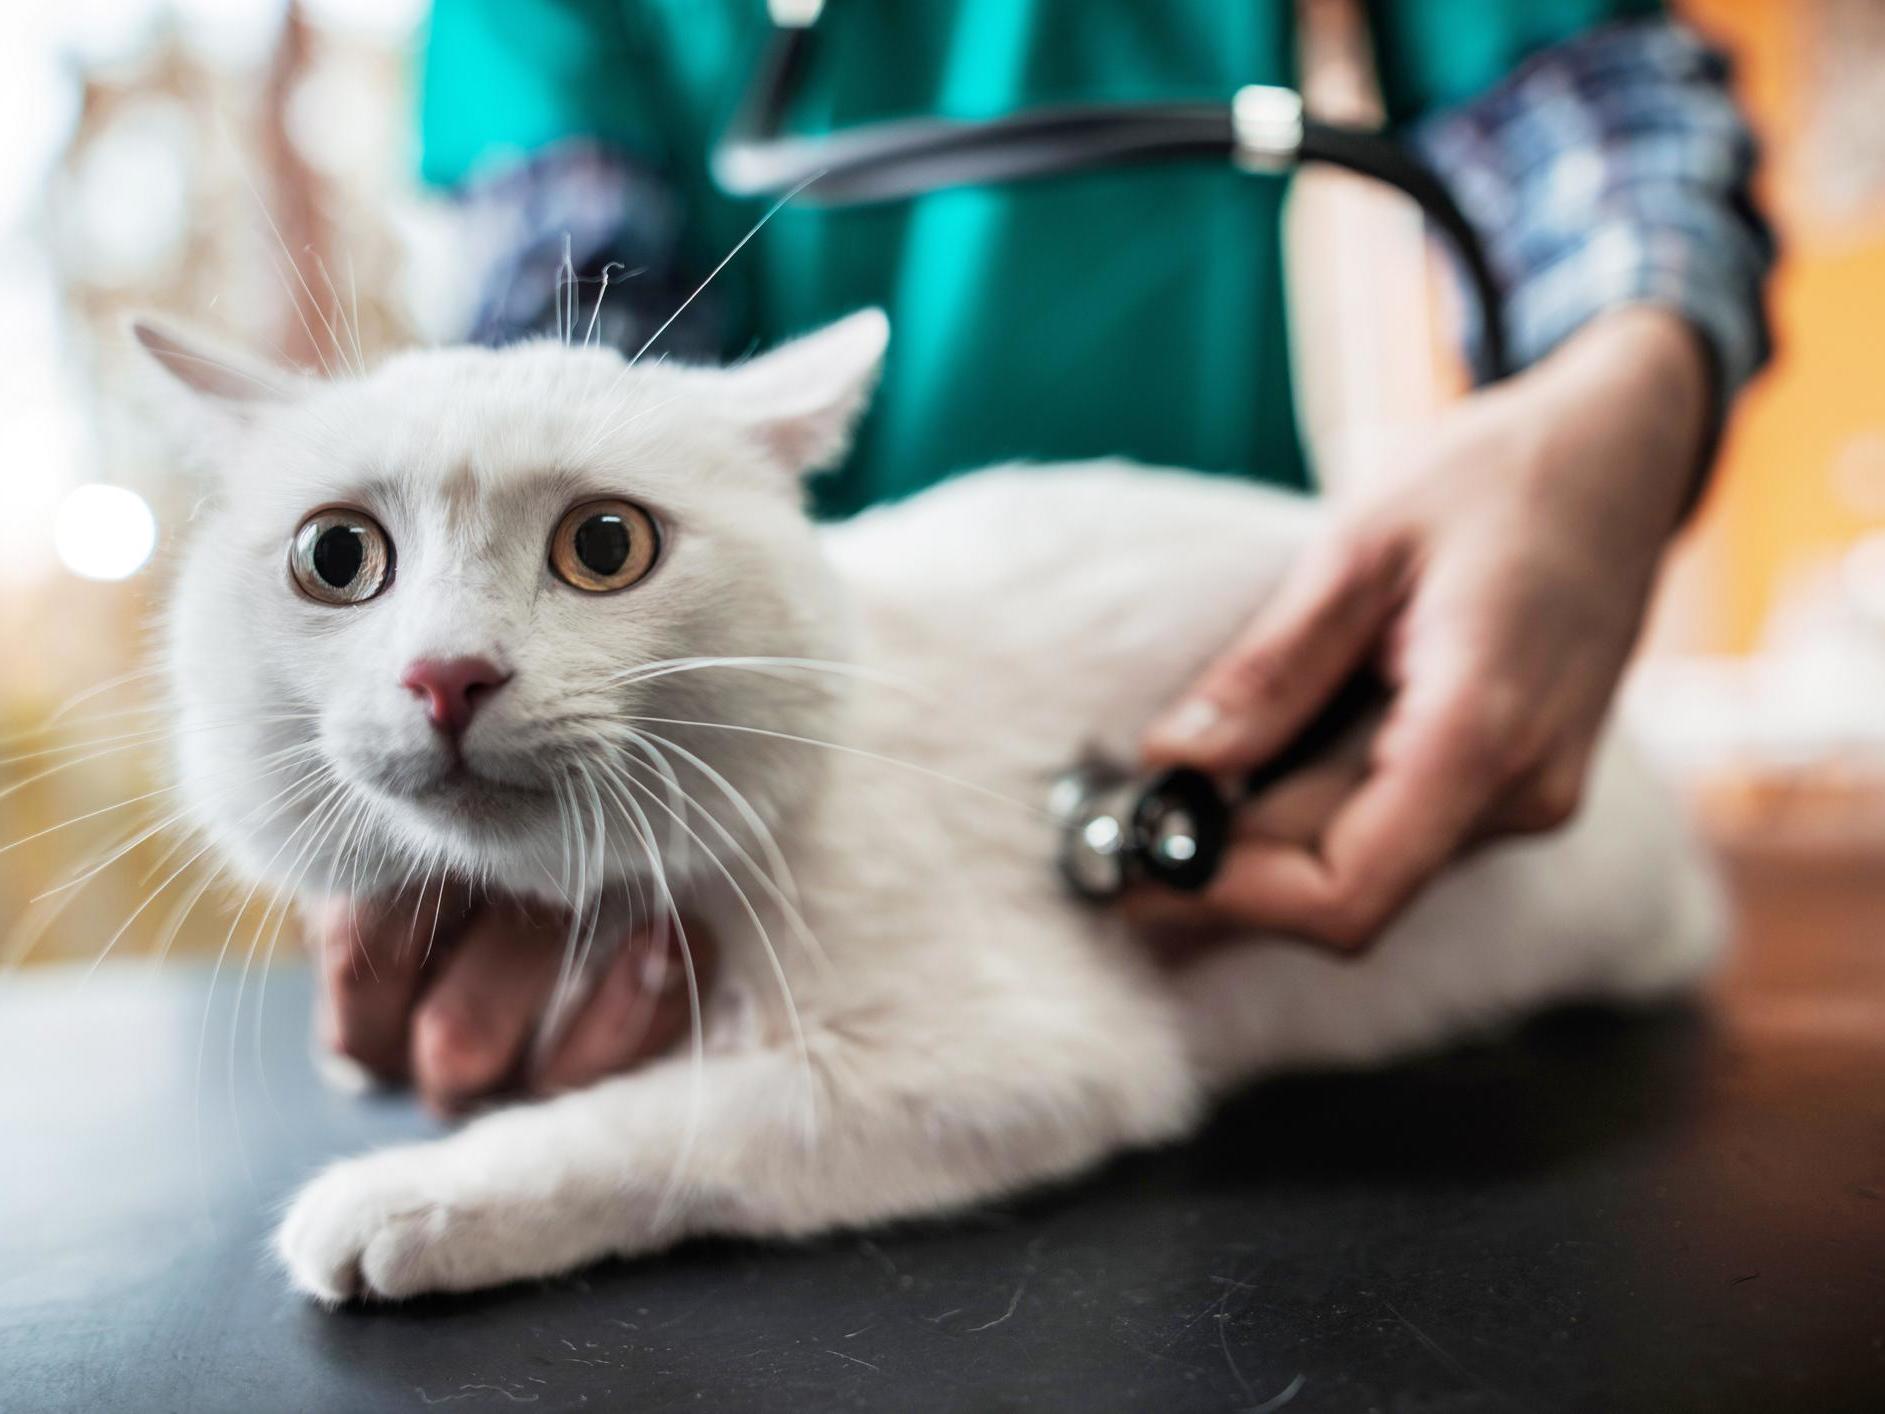 Coronavirus: Cats highly susceptible to infection, study finds